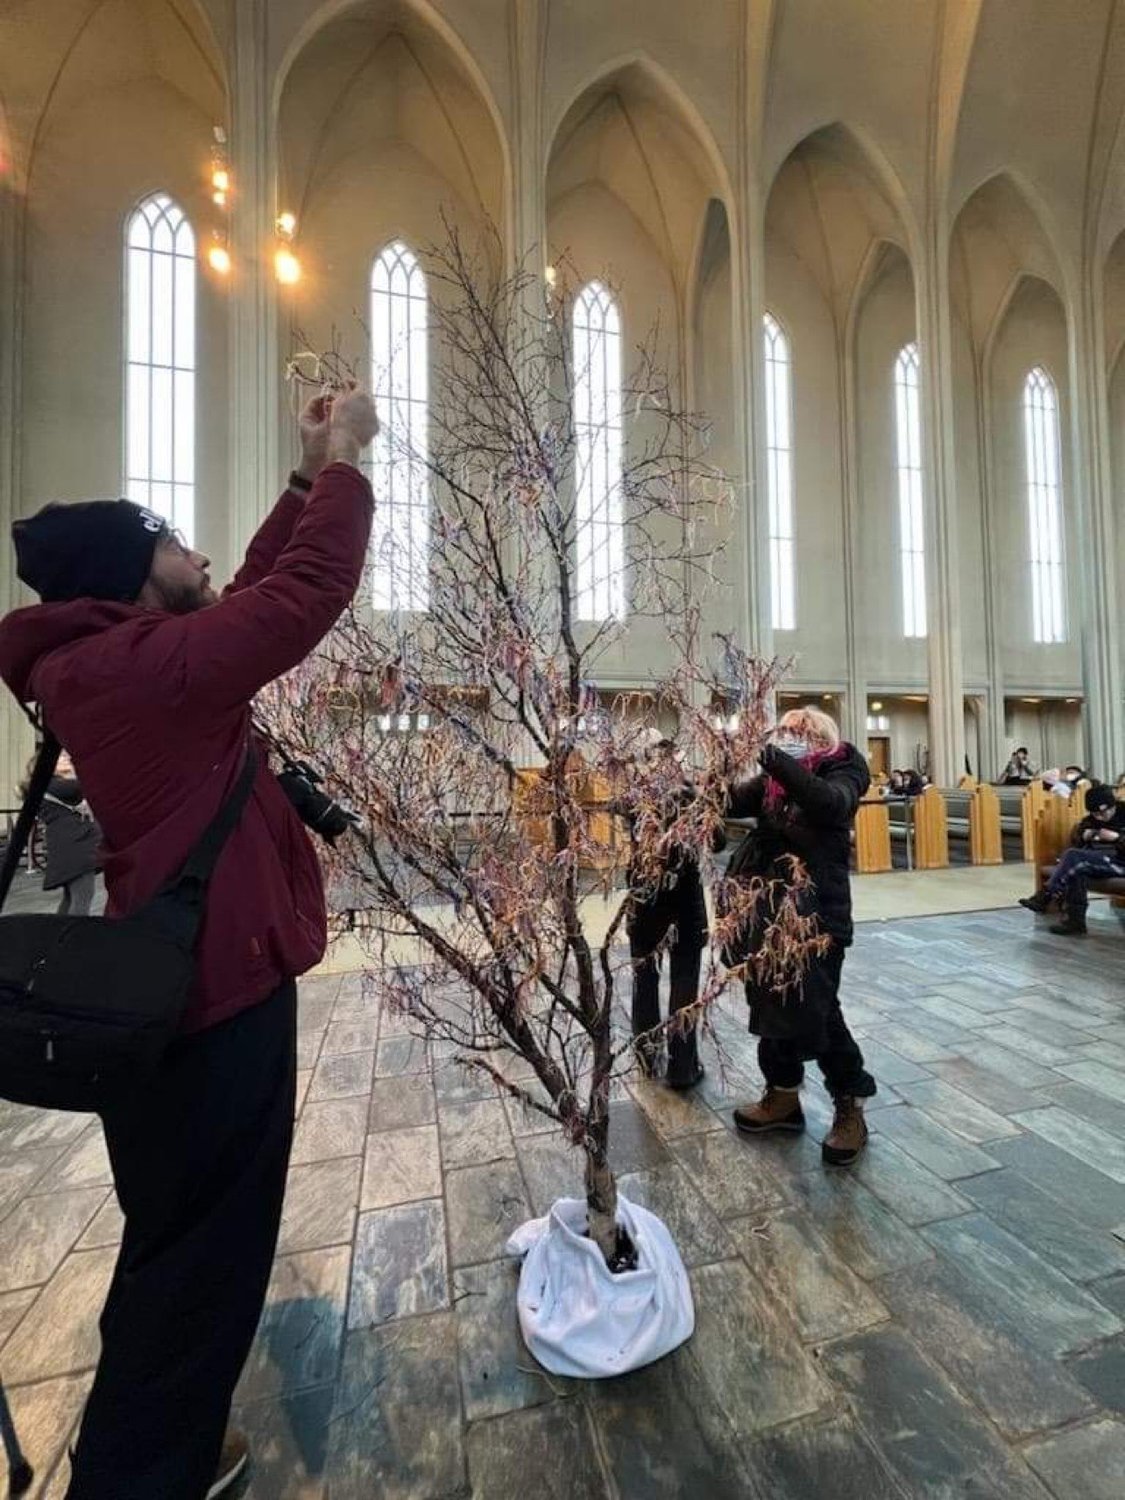 People tie ribbons onto the the prayer tree at the Hallsgrimskirkja Cathedral in Reykjavik, Iceland. Hyde visited the cathedral during her March trip to Iceland. “It brought me to tears. Seeing people from all over the world inside this amazing cathedral and then to see them praying and tying ribbons on the tree…it was very moving,” reflected Hyde.